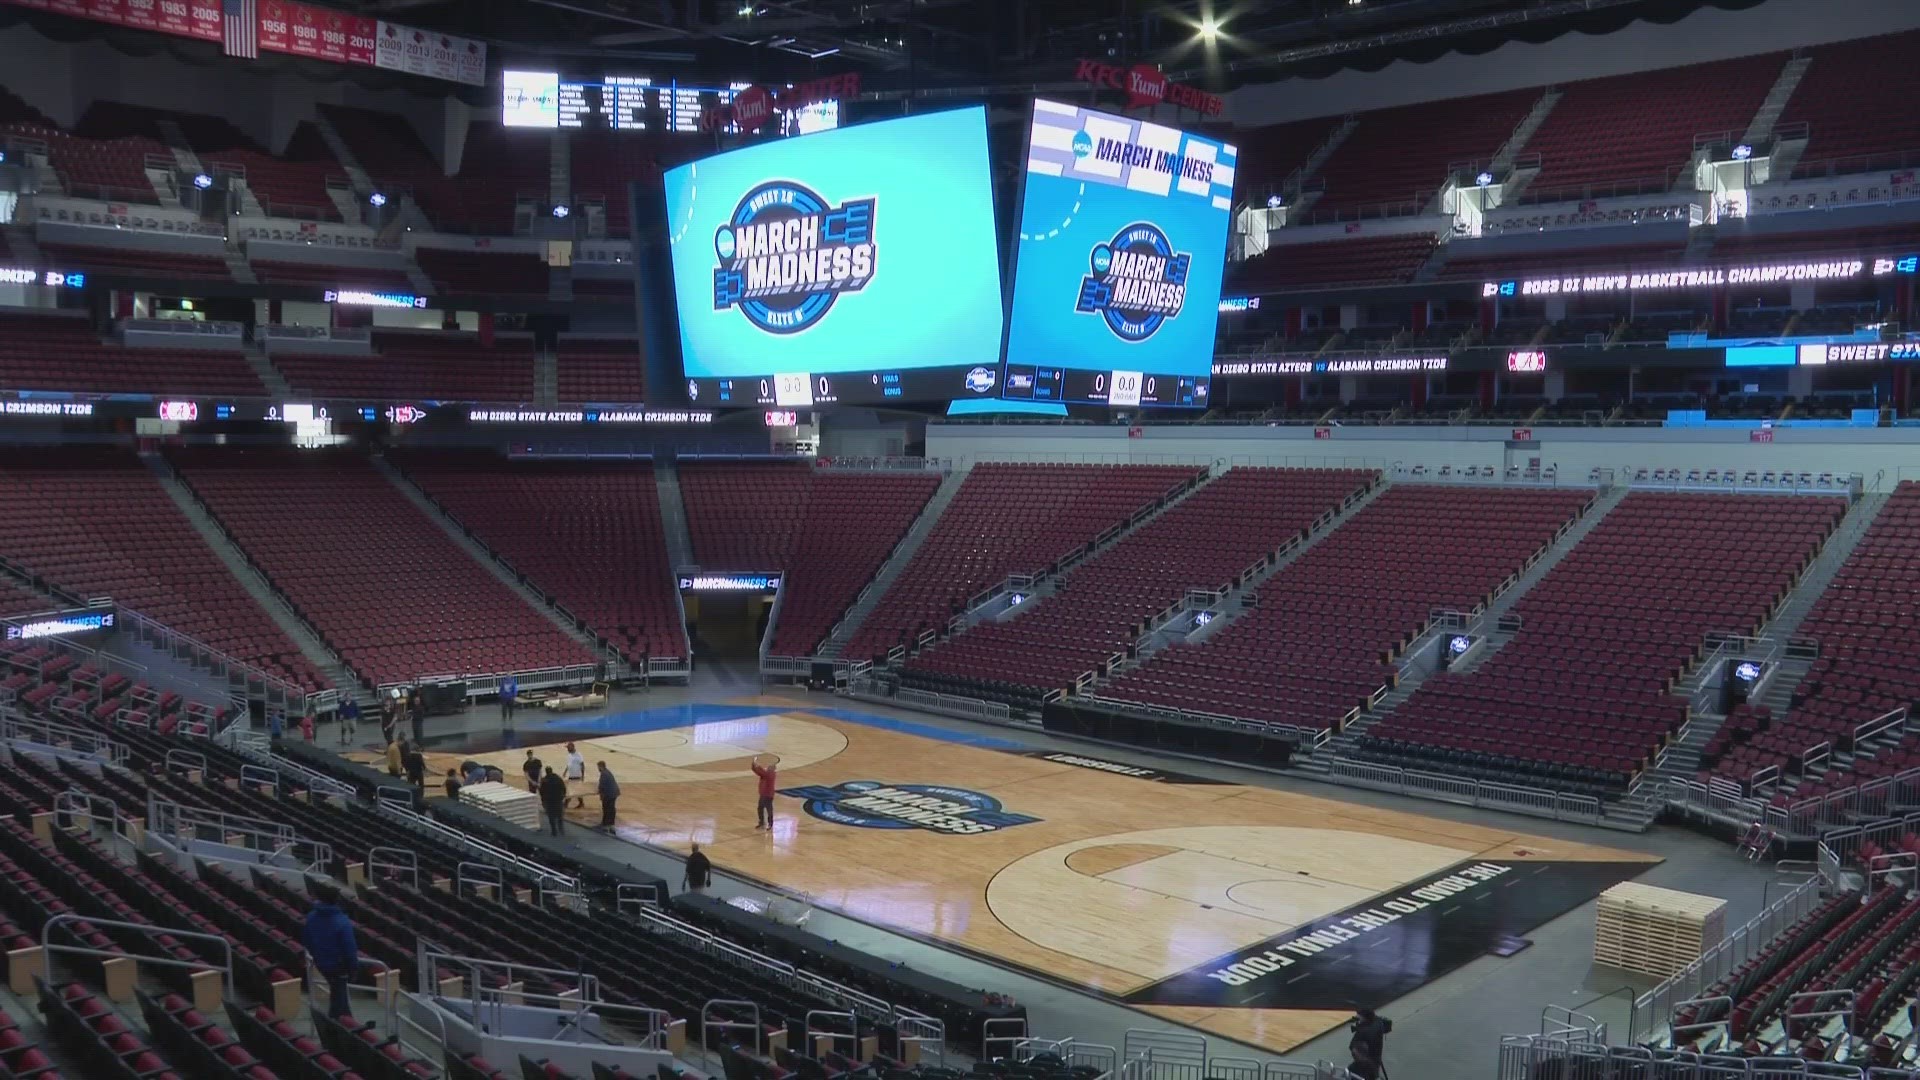 More than 20,000 fans are expected to pack the arena bringing a huge economic impact to the Metro.